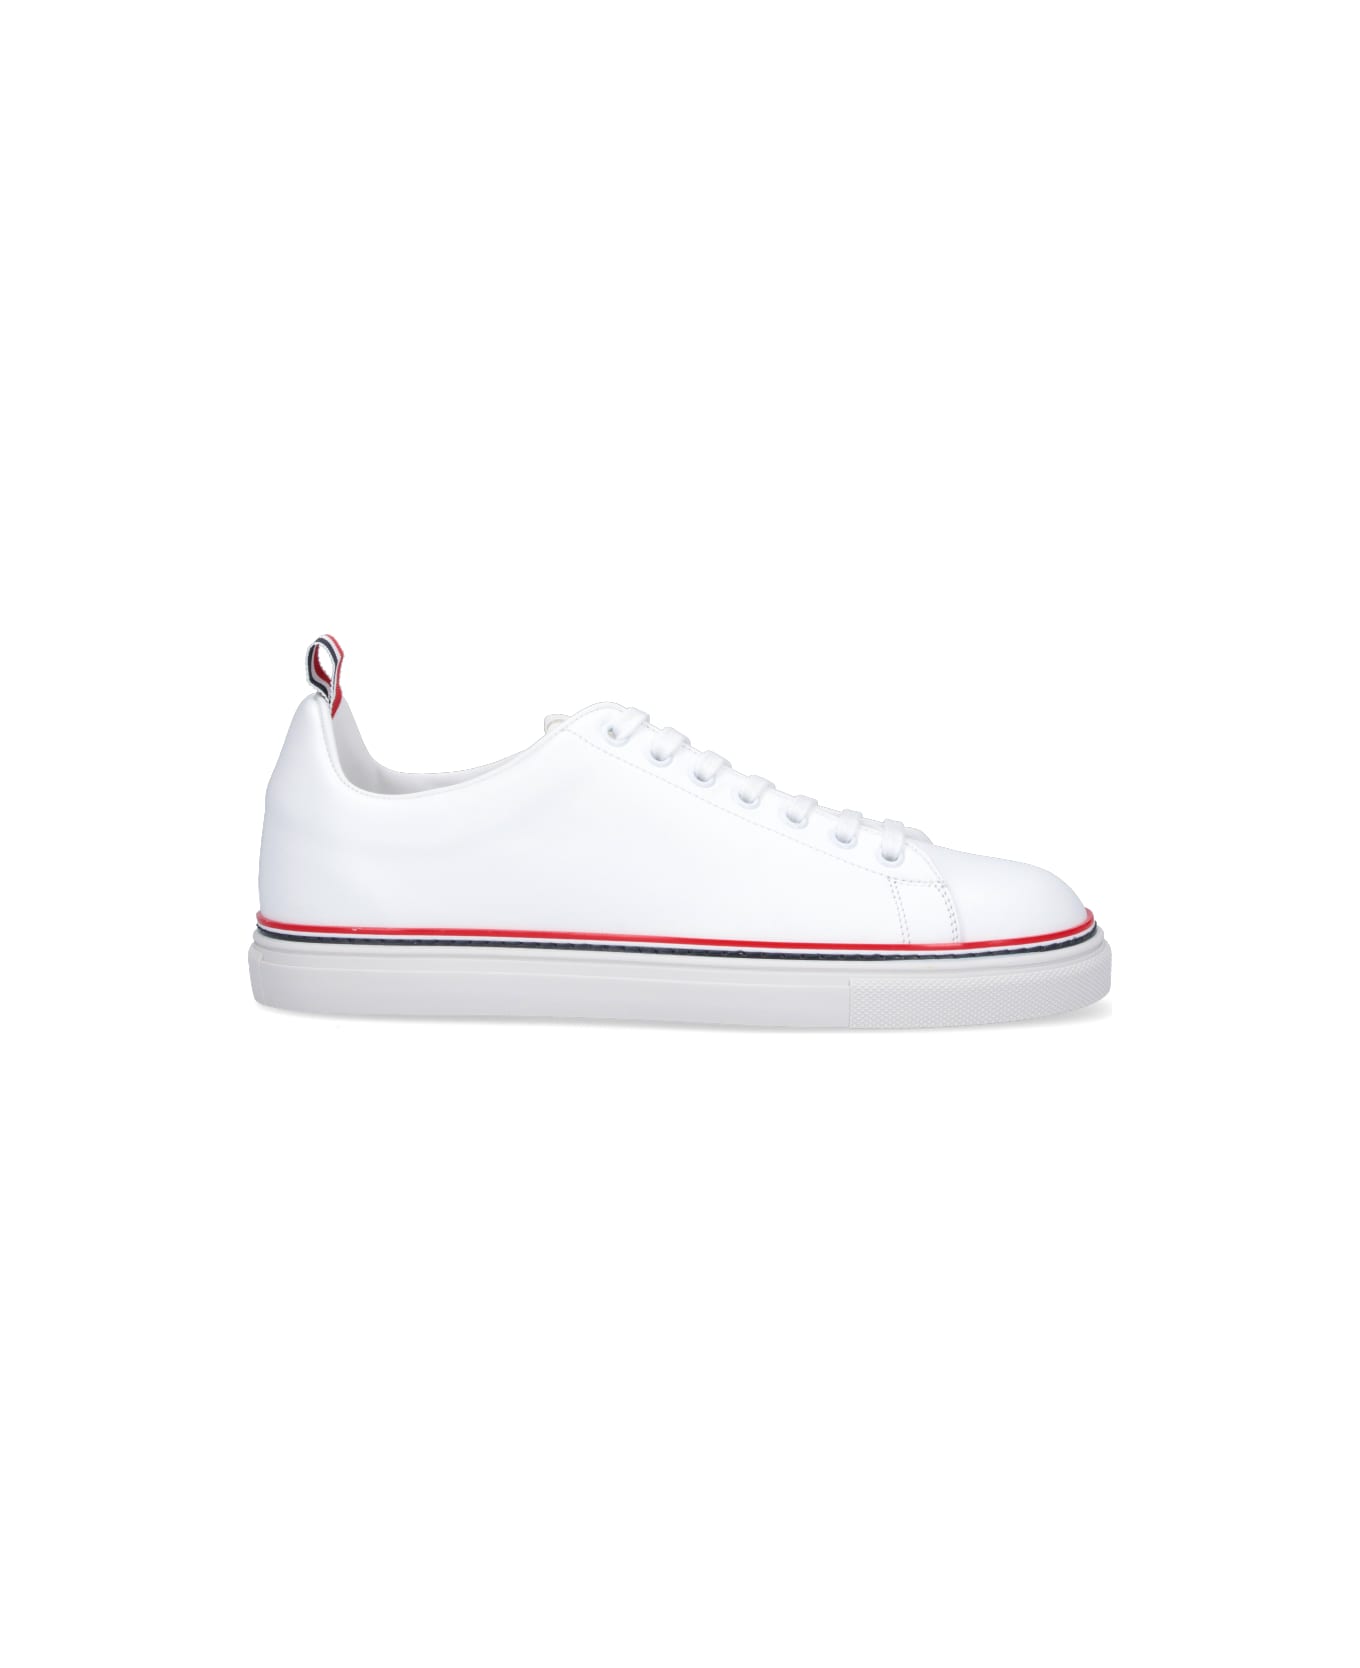 Thom Browne Calf Leather Tennis Shoes - White